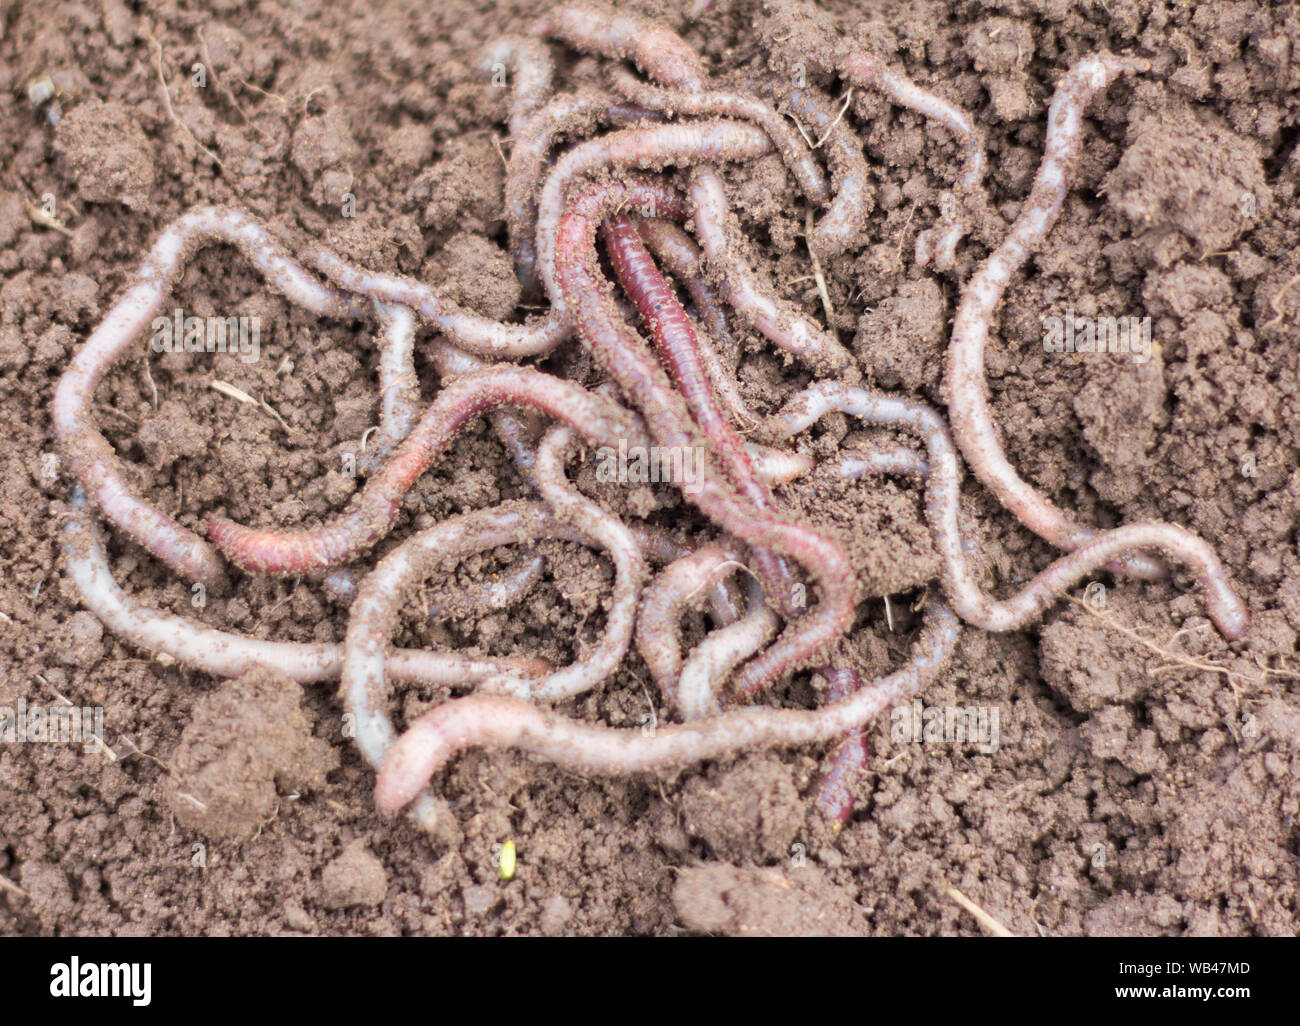 Macro shot of red worms Dendrobena in manure, earthworm live bait